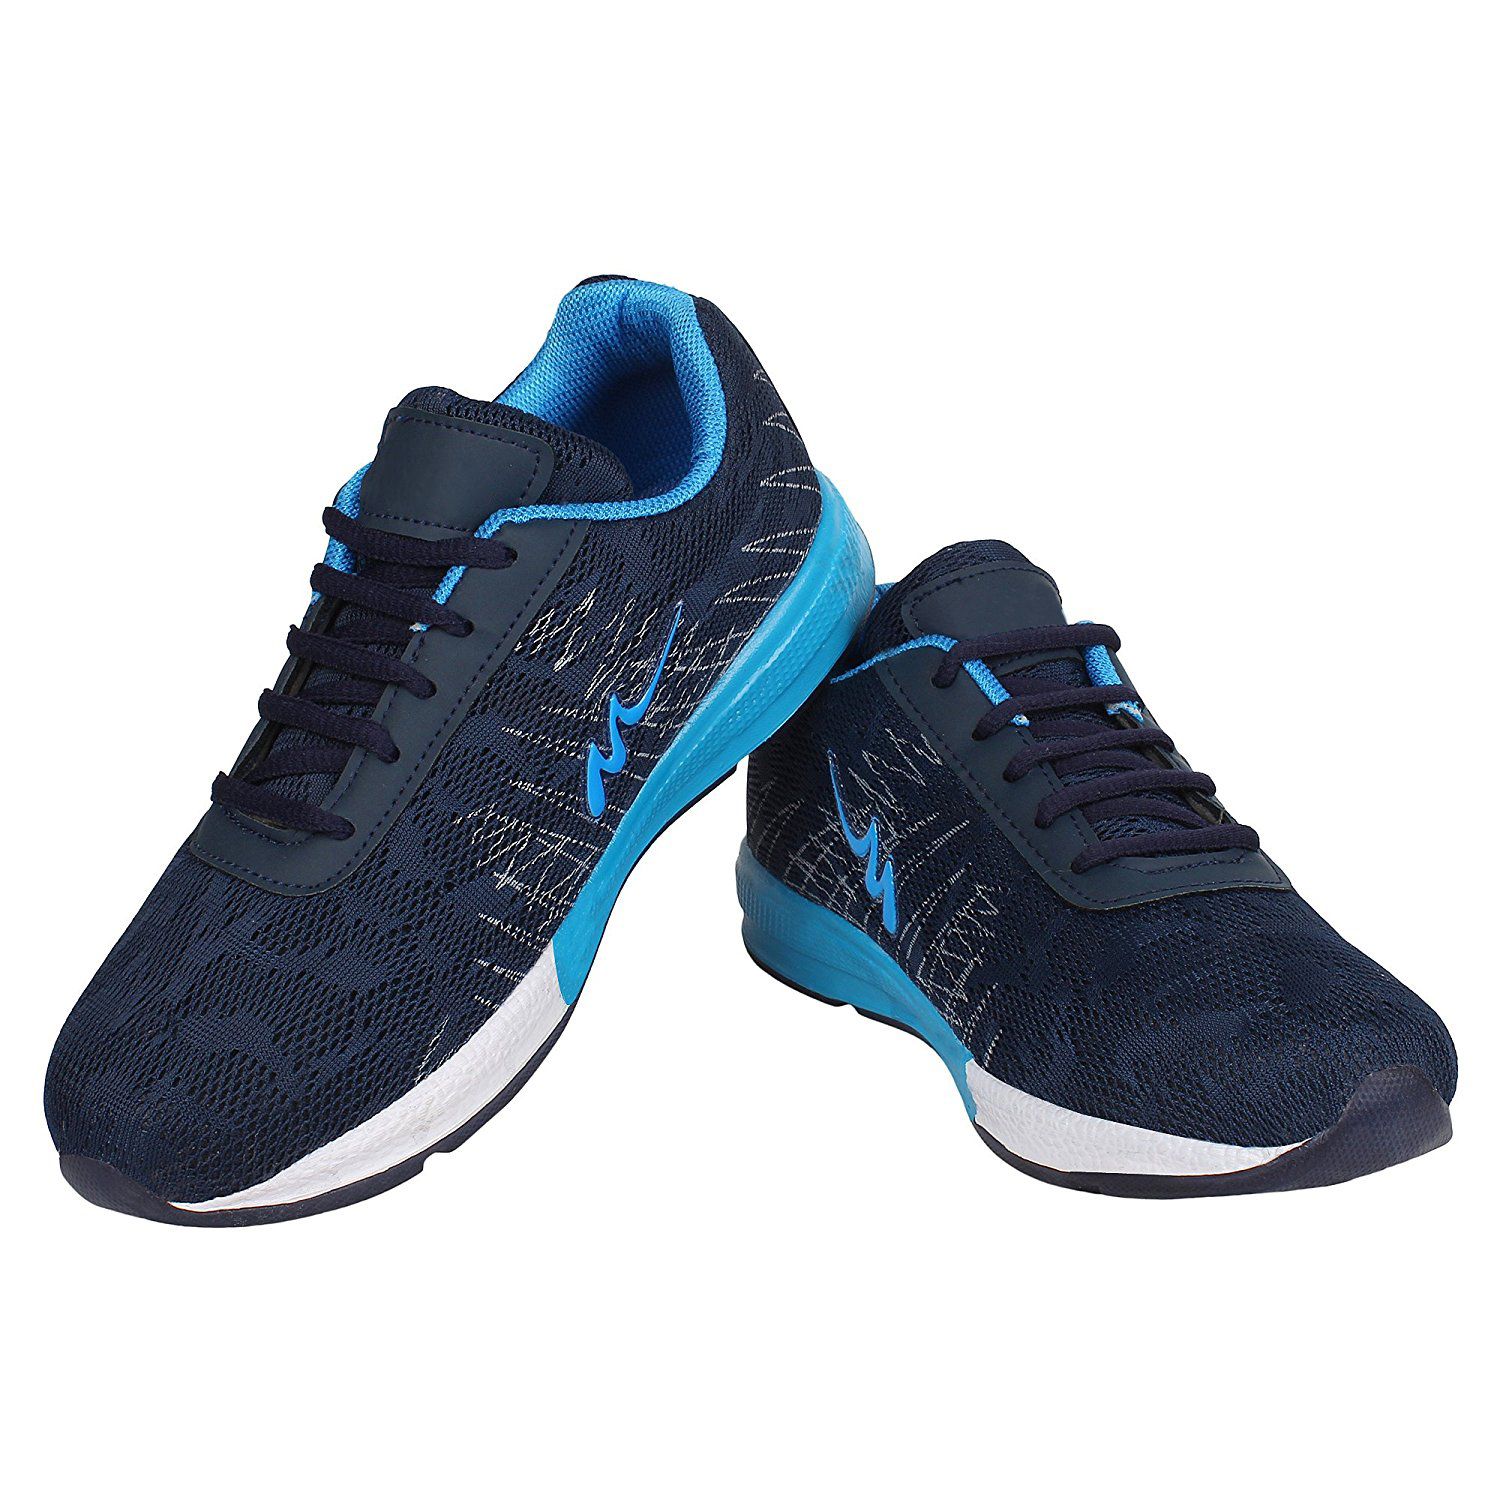 Clymb Blue Running Shoes - Buy Clymb Blue Running Shoes Online at Best ...